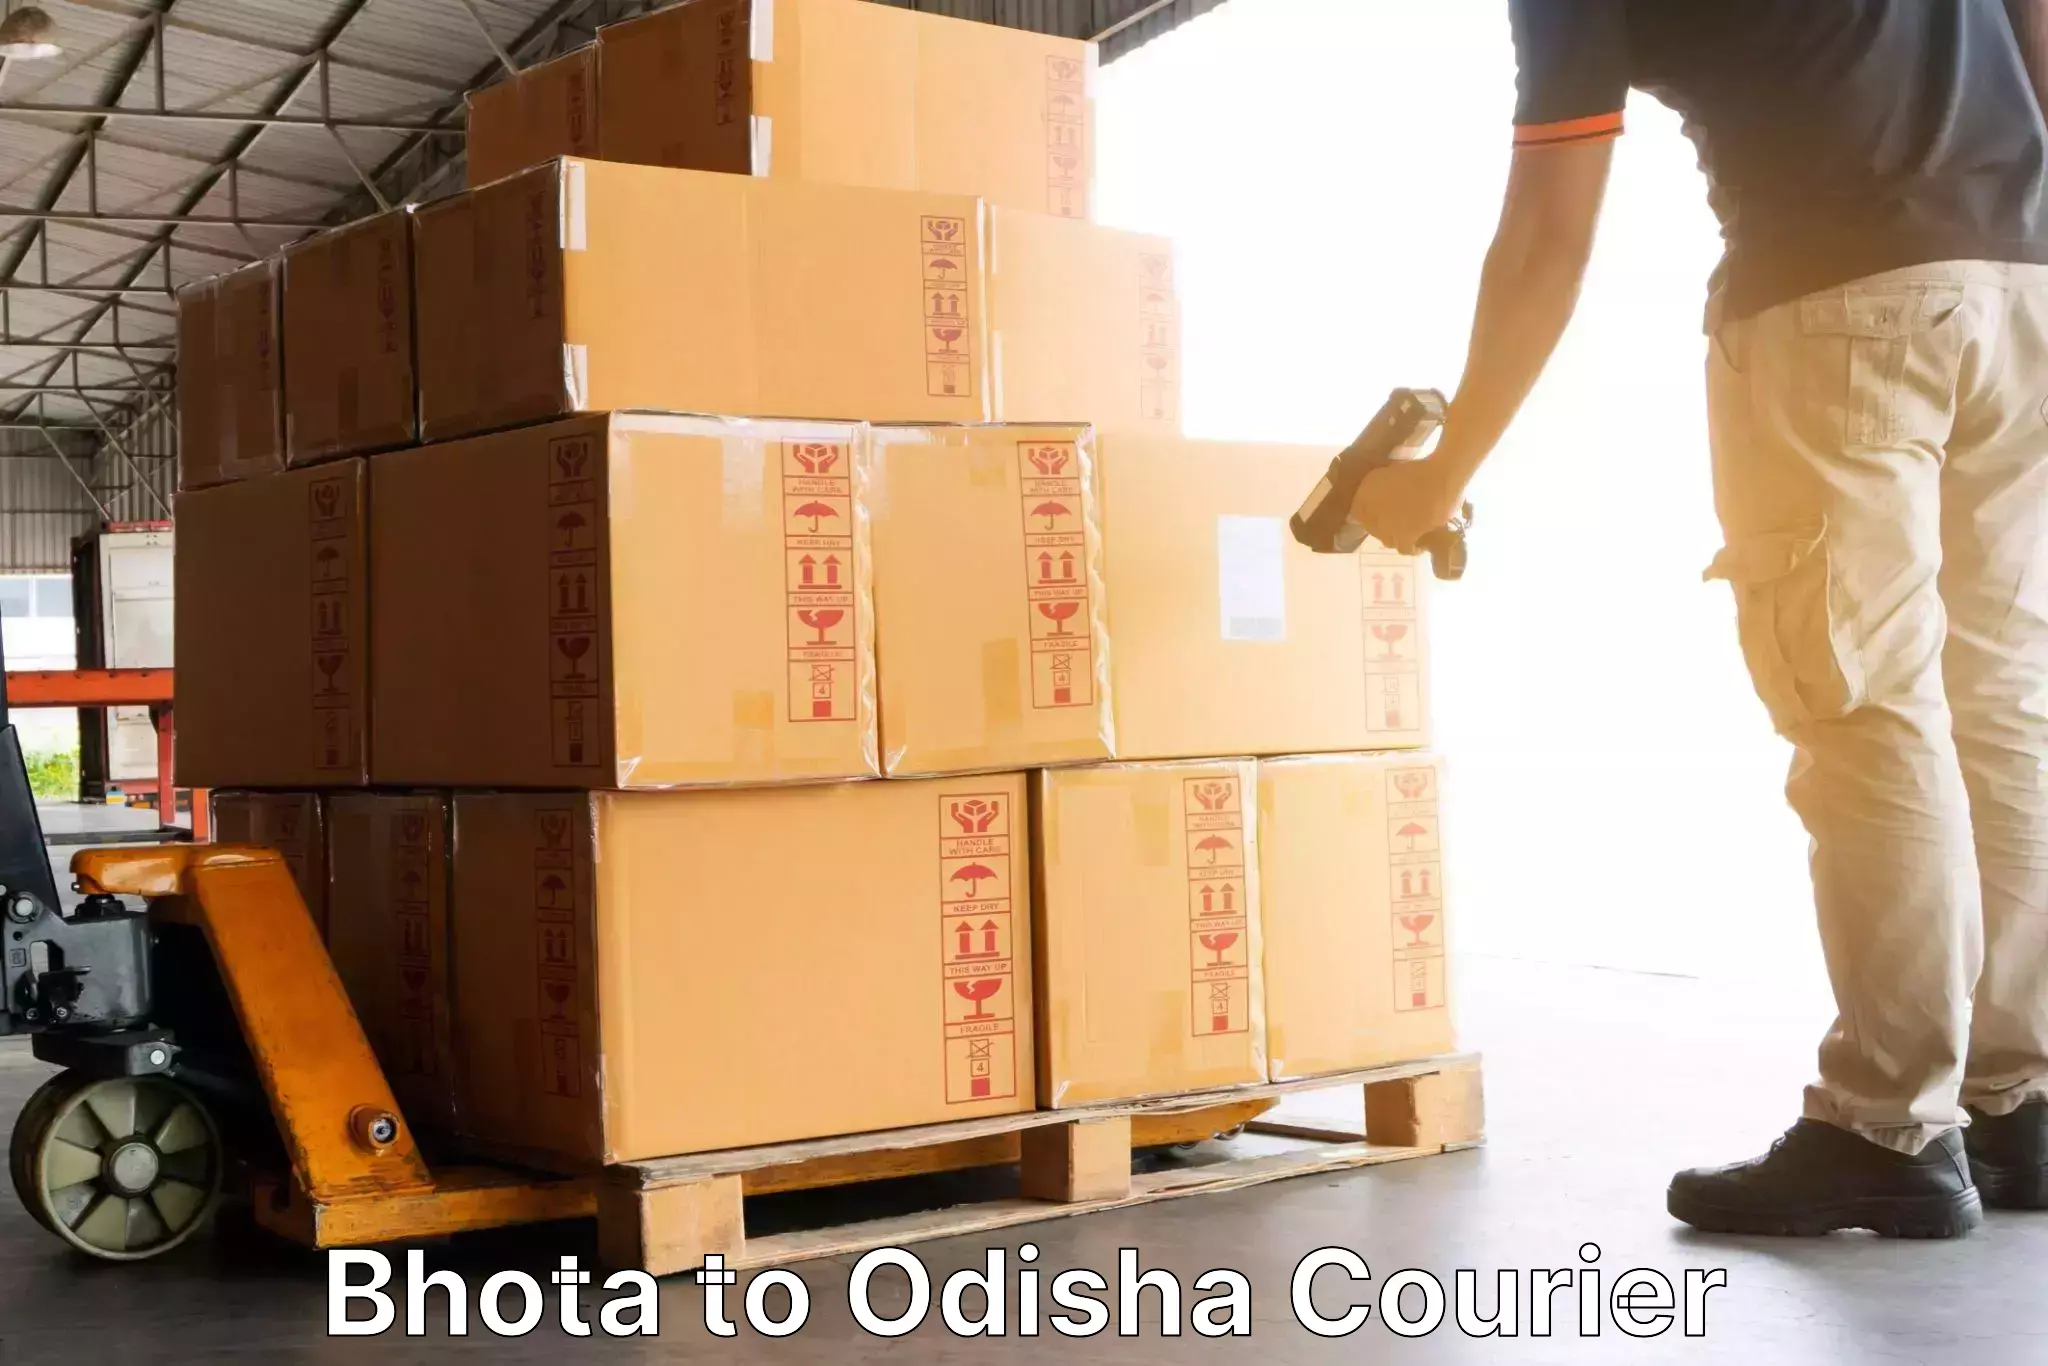 Courier insurance in Bhota to Odisha